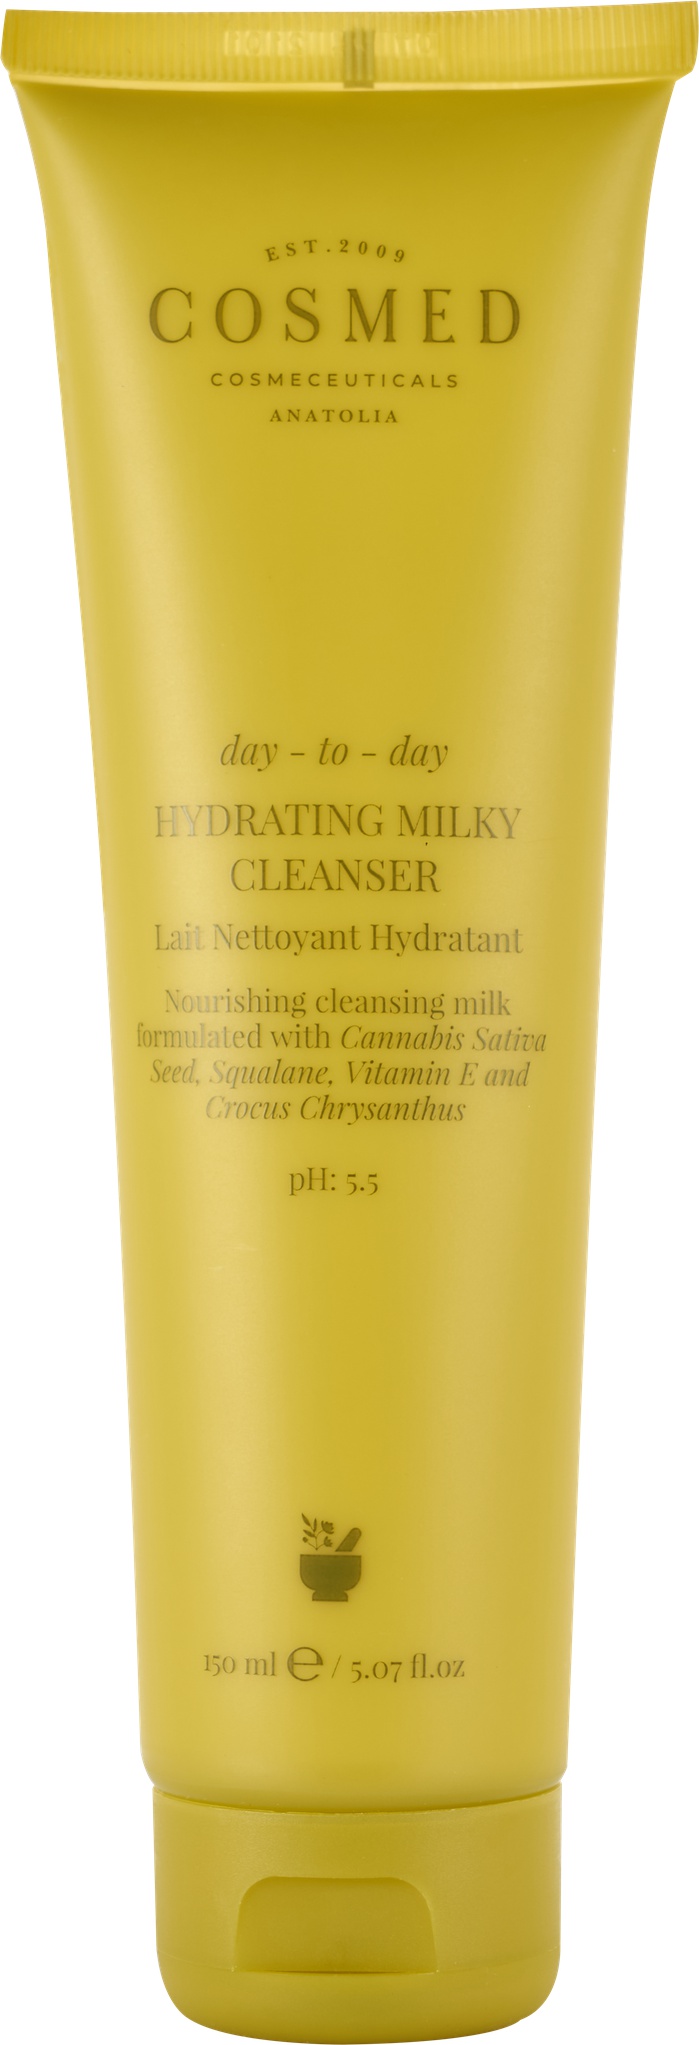 Cosmed Cosmeseuticals Day to Day - Hydrating Milky Cleanser